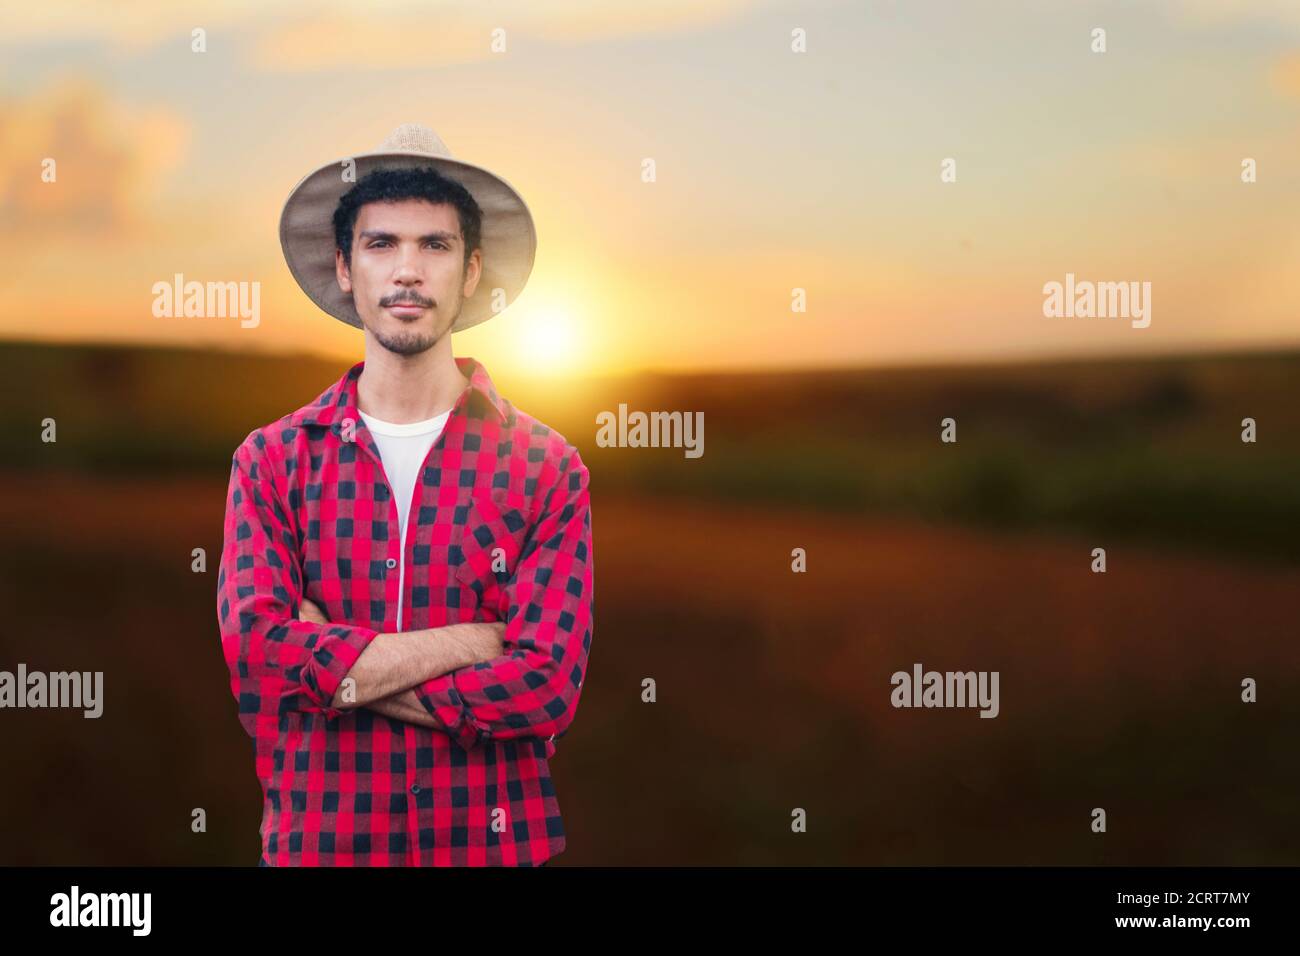 Farmer at sunset outdoor . Man with hat in a sunset blurry background. Space for text. Stock Photo